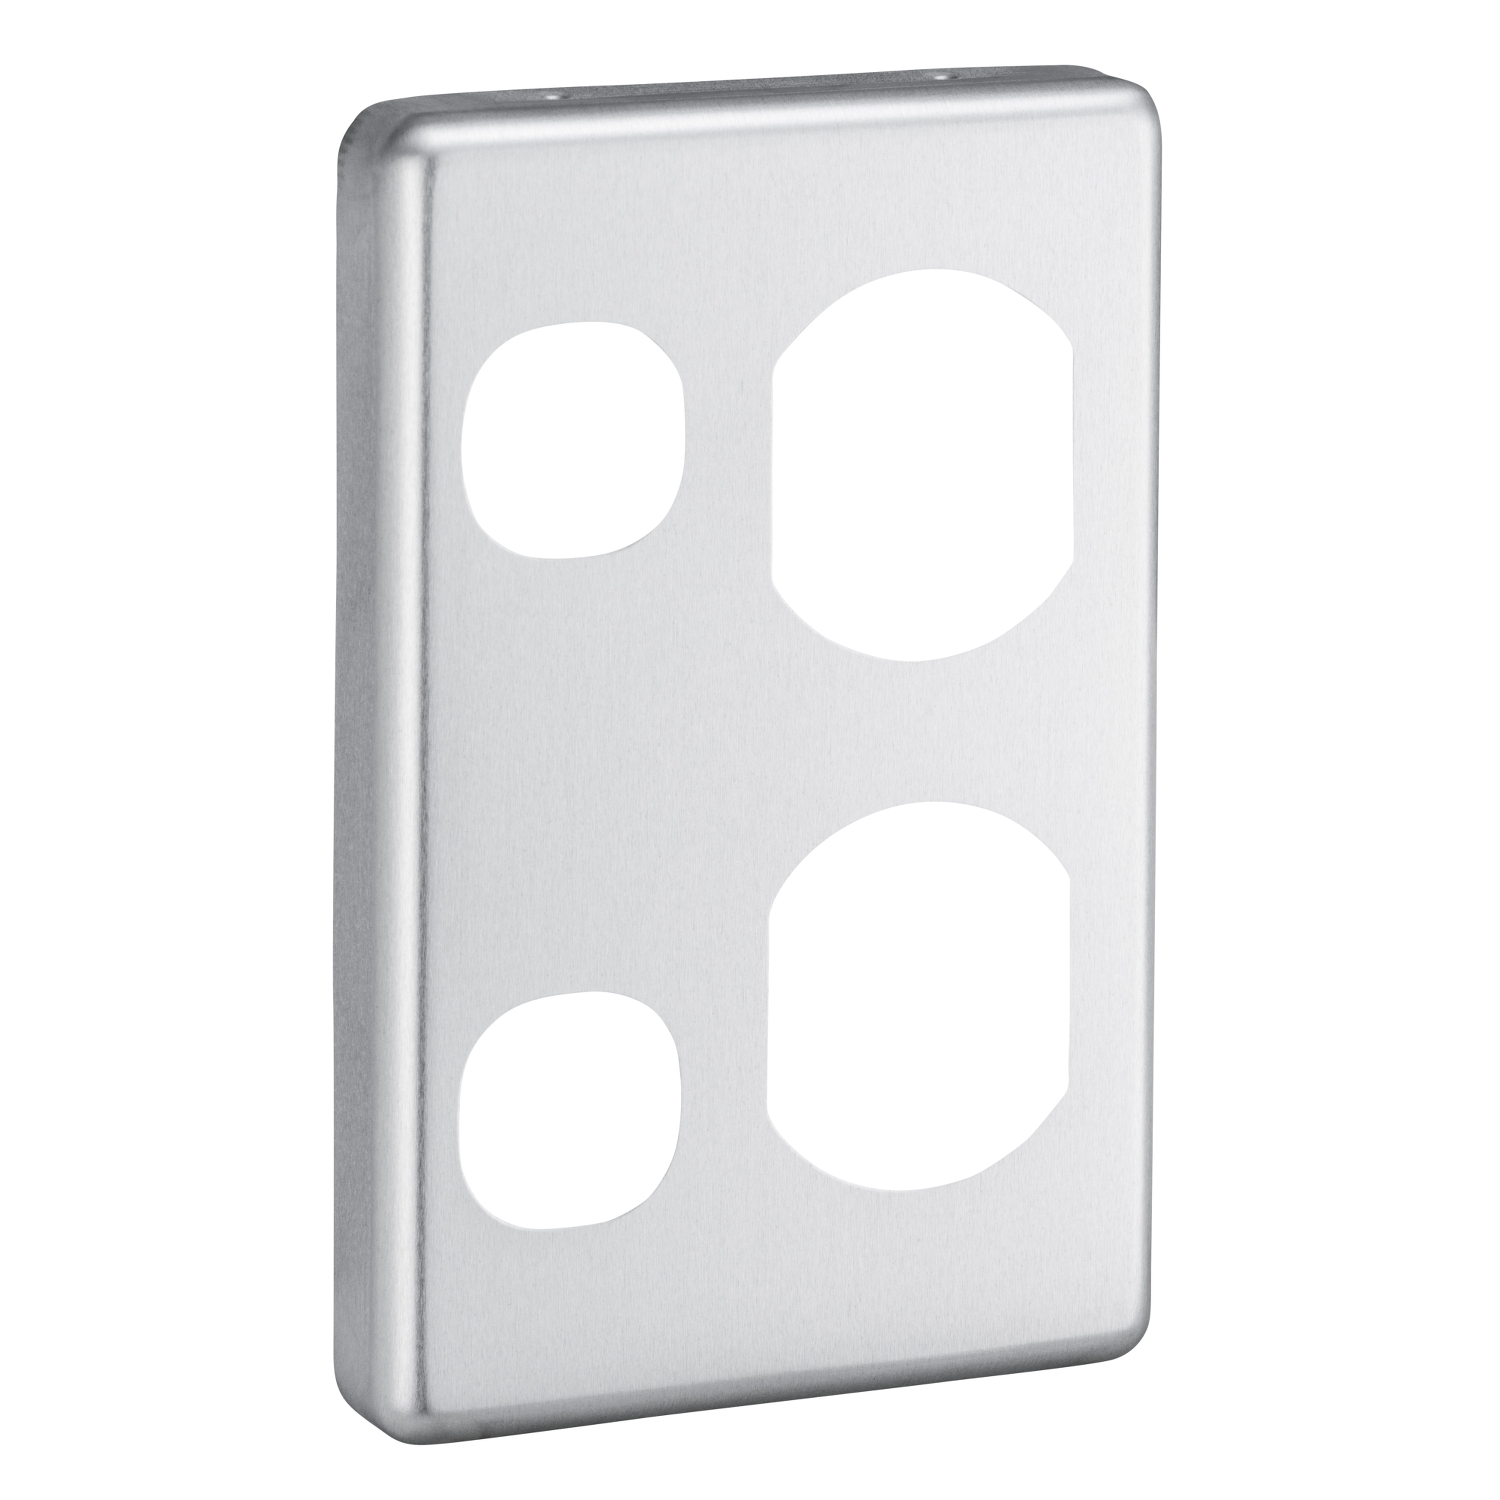 Socket Outlet Grids and Covers - C2000 Series, Double